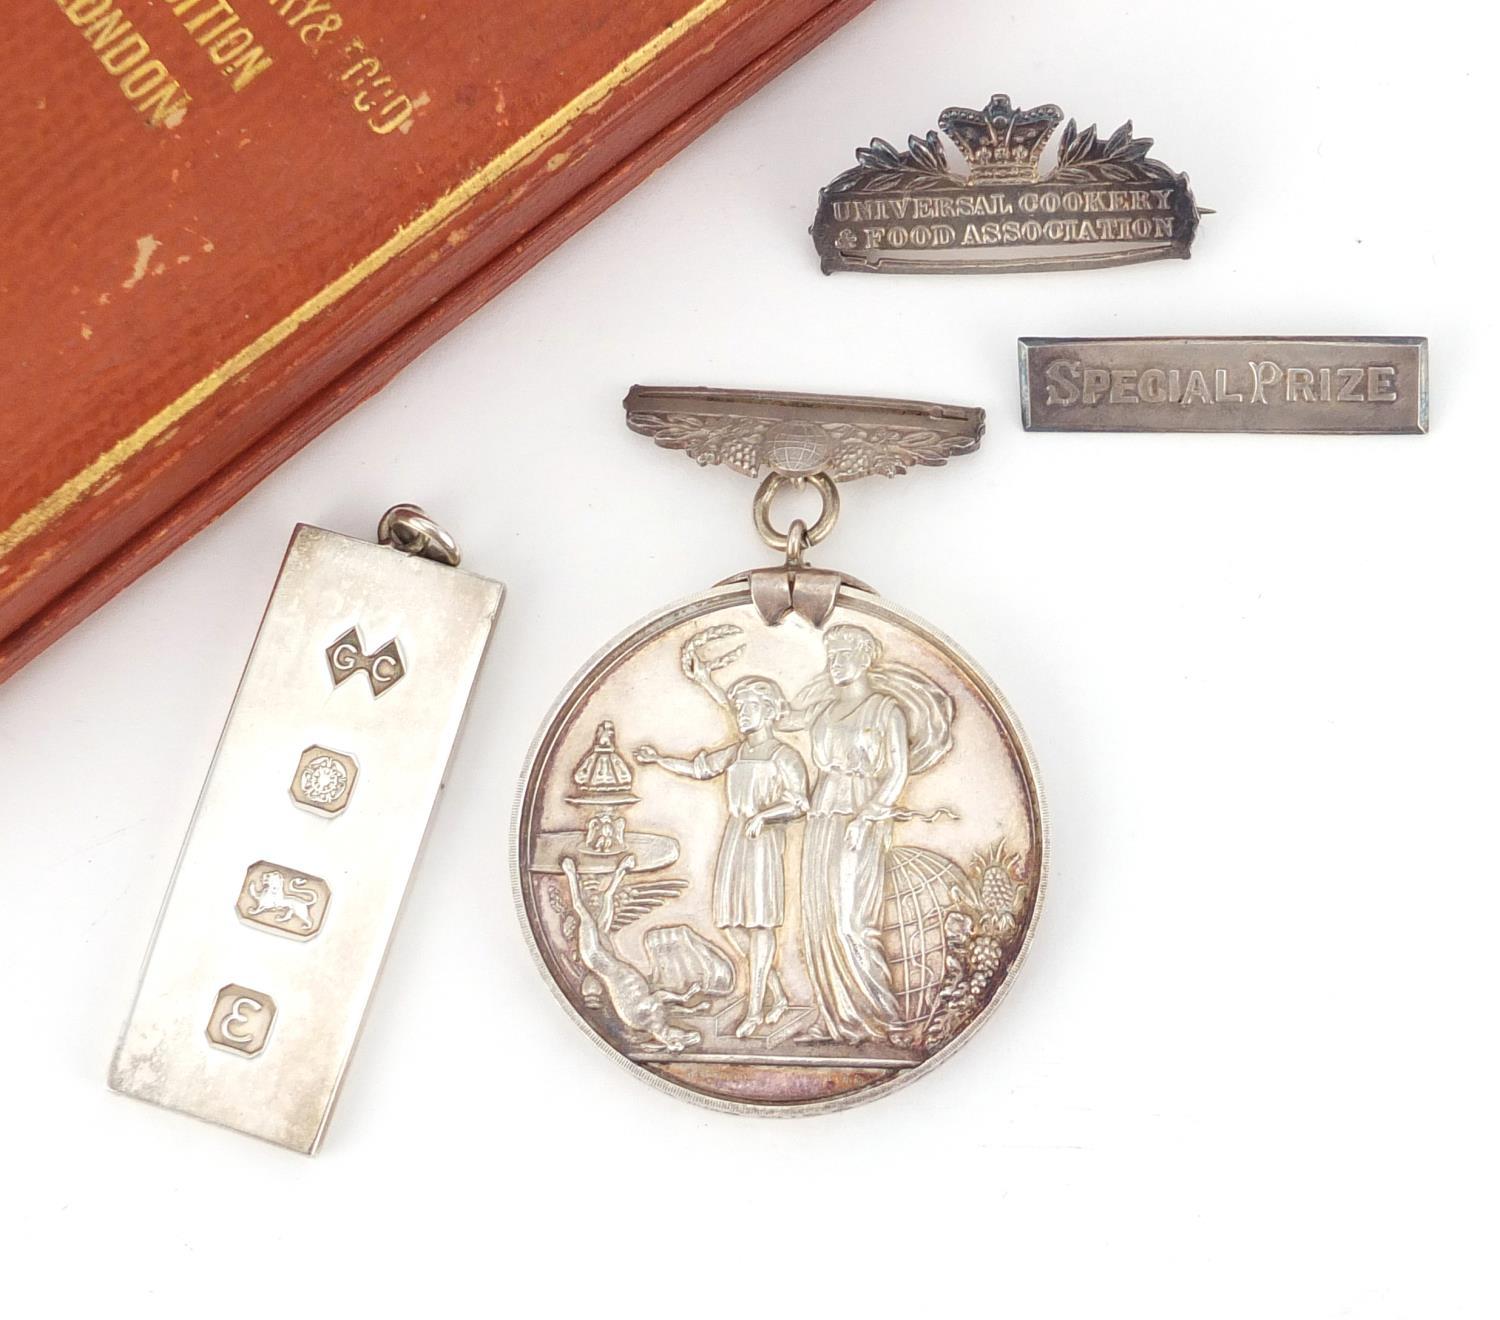 Universal Cookery and Food Exhibition silver special prize medal, with fitted case, engraved - Image 3 of 16